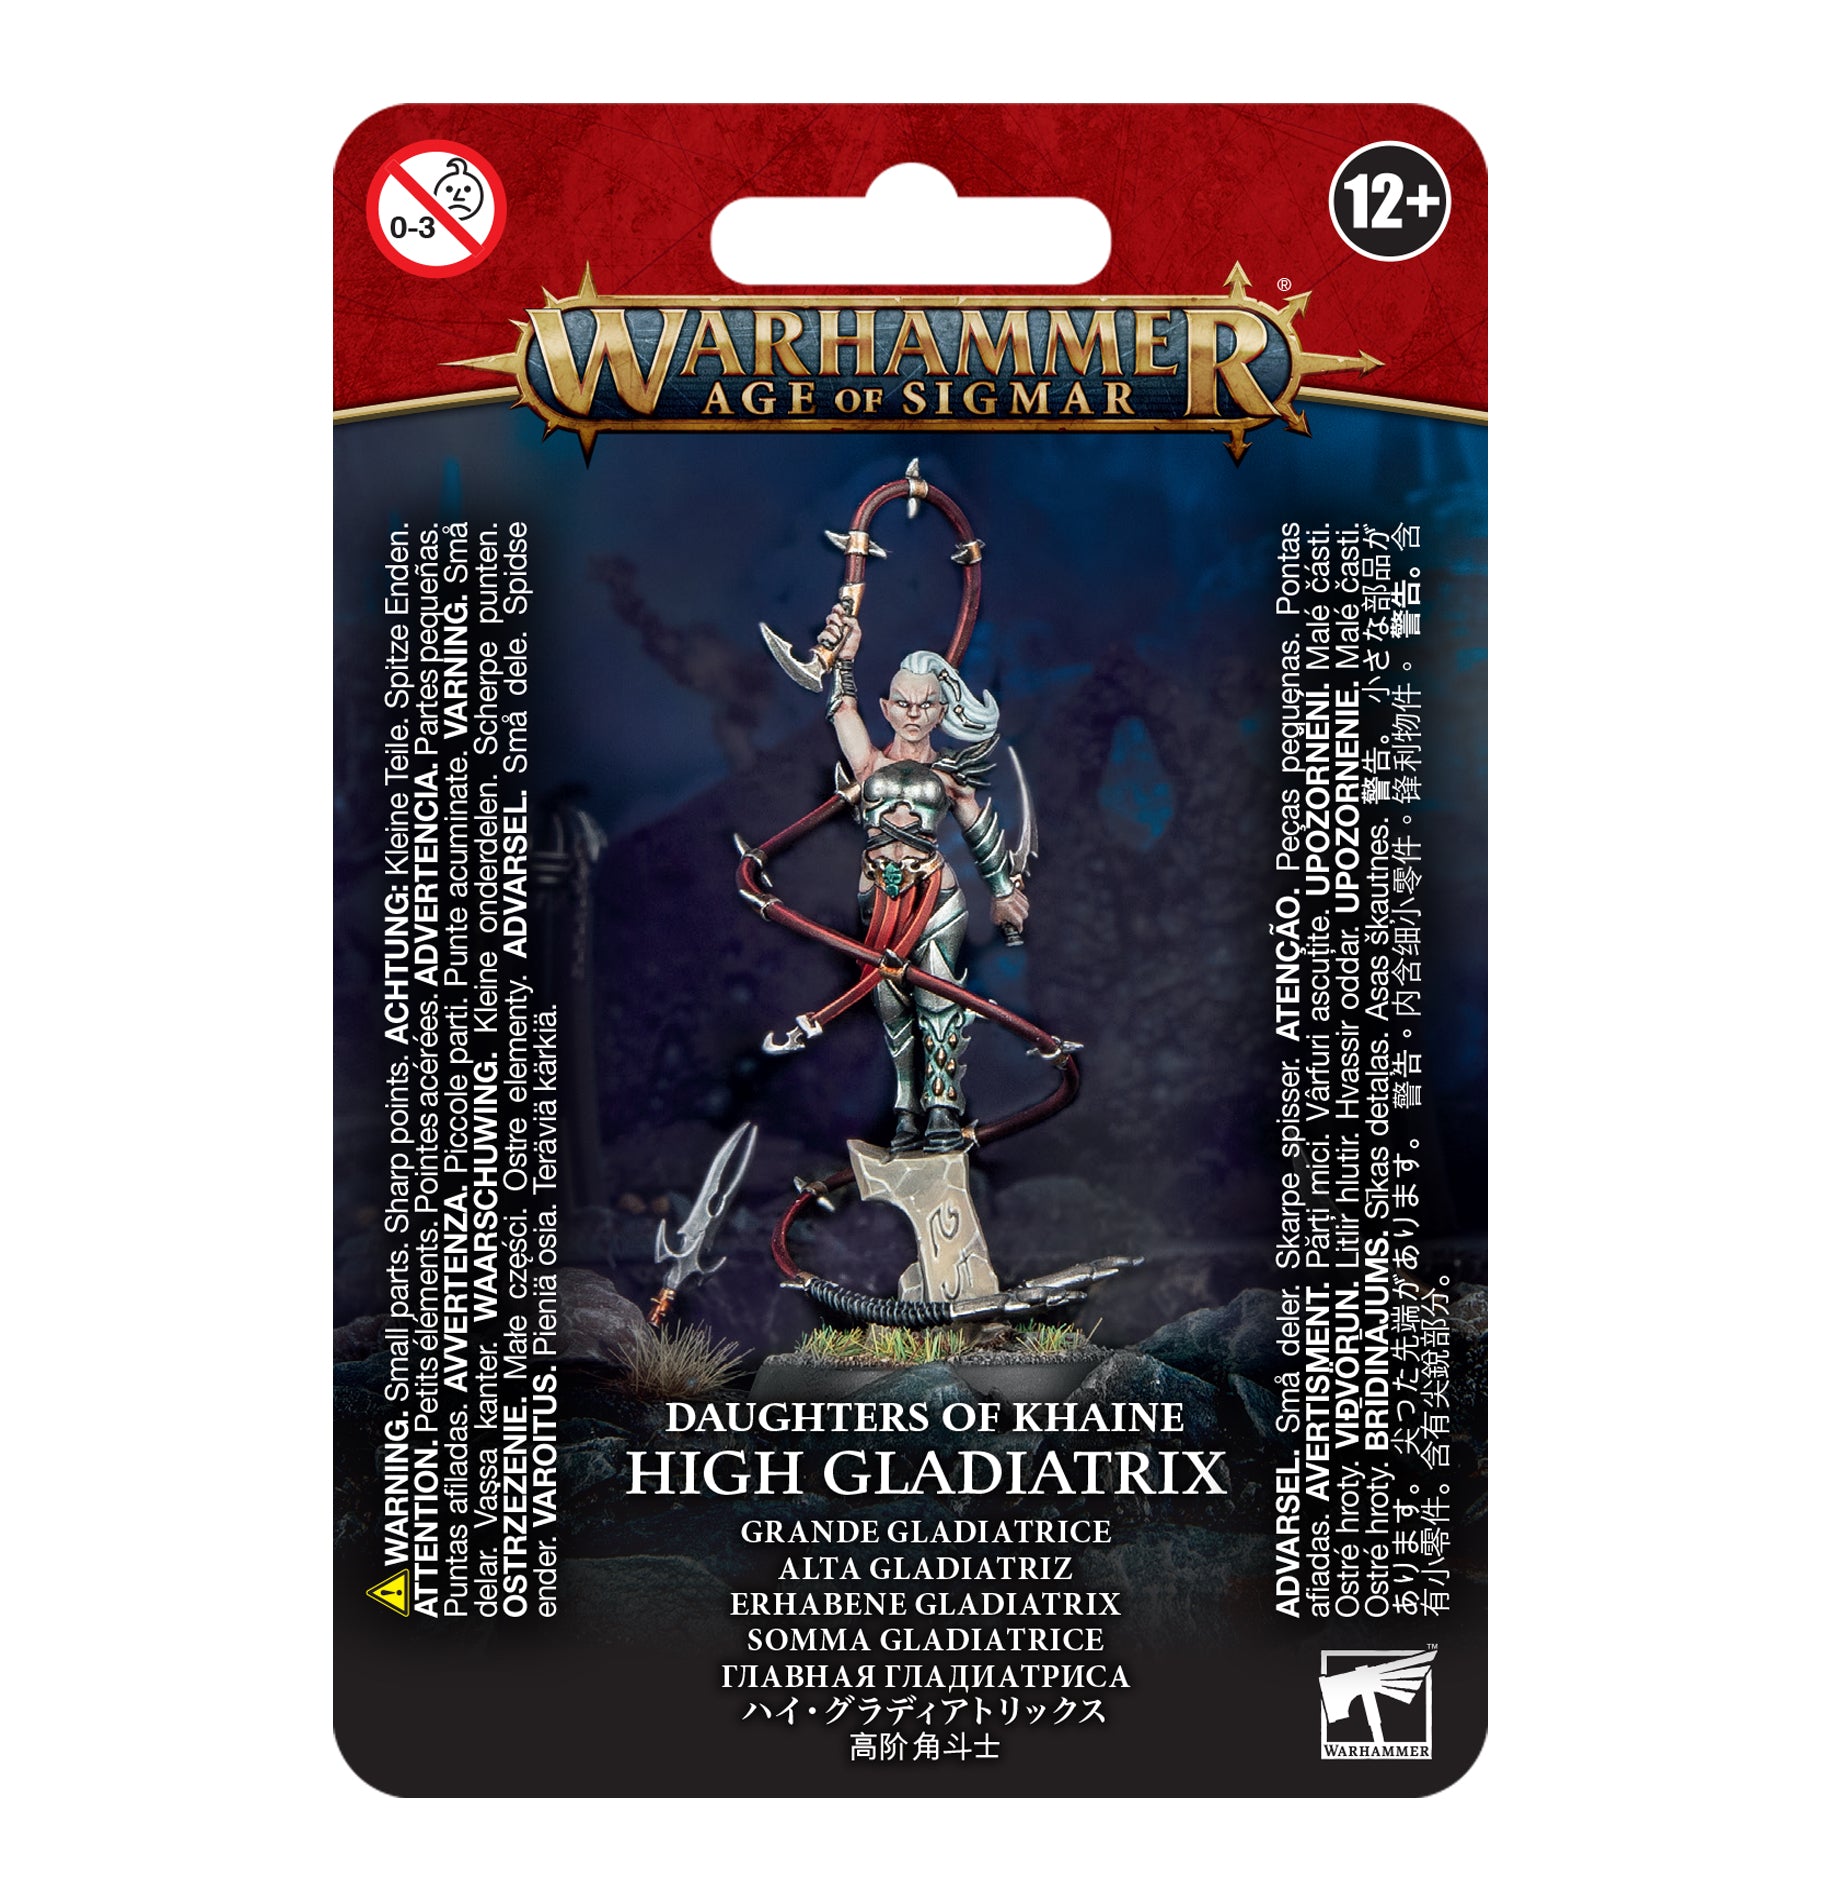 High Gladiatorix - Daughters of Khaine - Game On